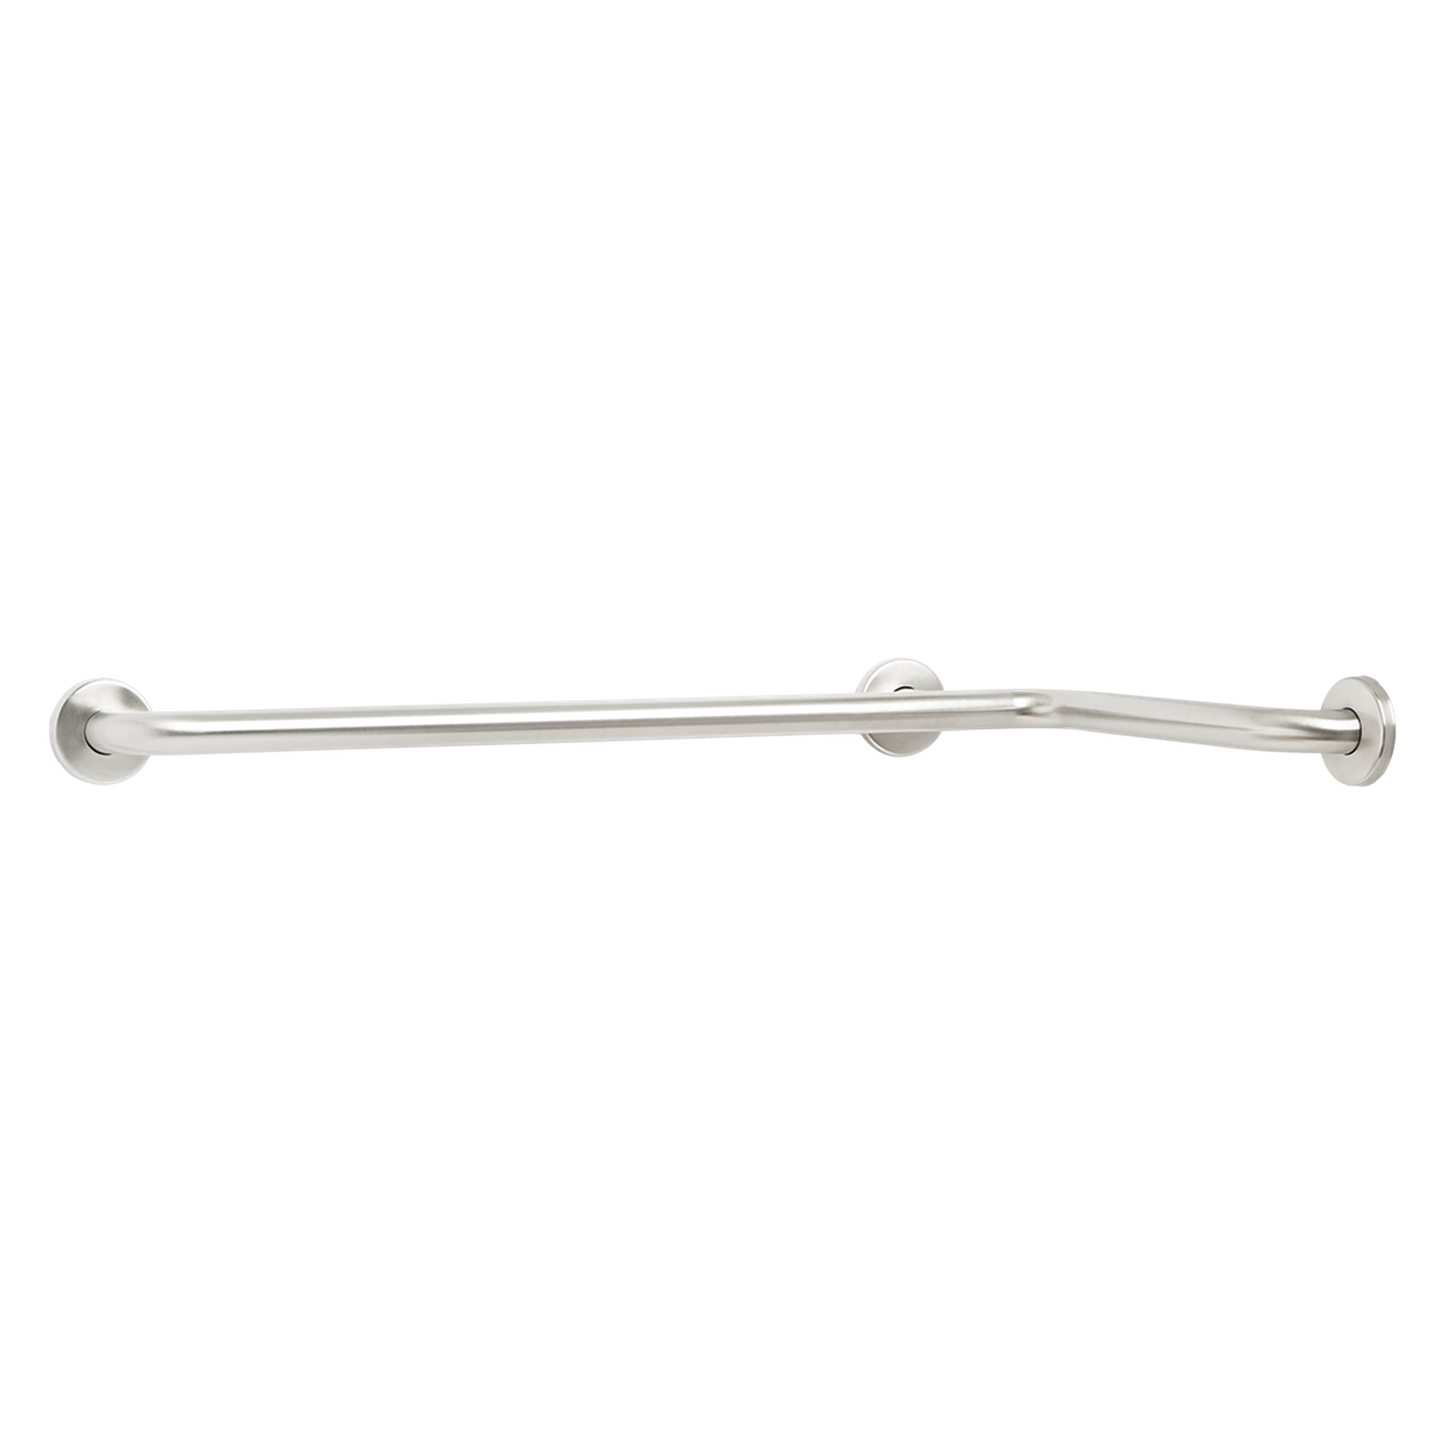 Seachrome Signature Series 20" x 40" Satin Stainless Steel 1.5" Bar Diameter Exposed Flange Curved Tub and Shower Grab Bar